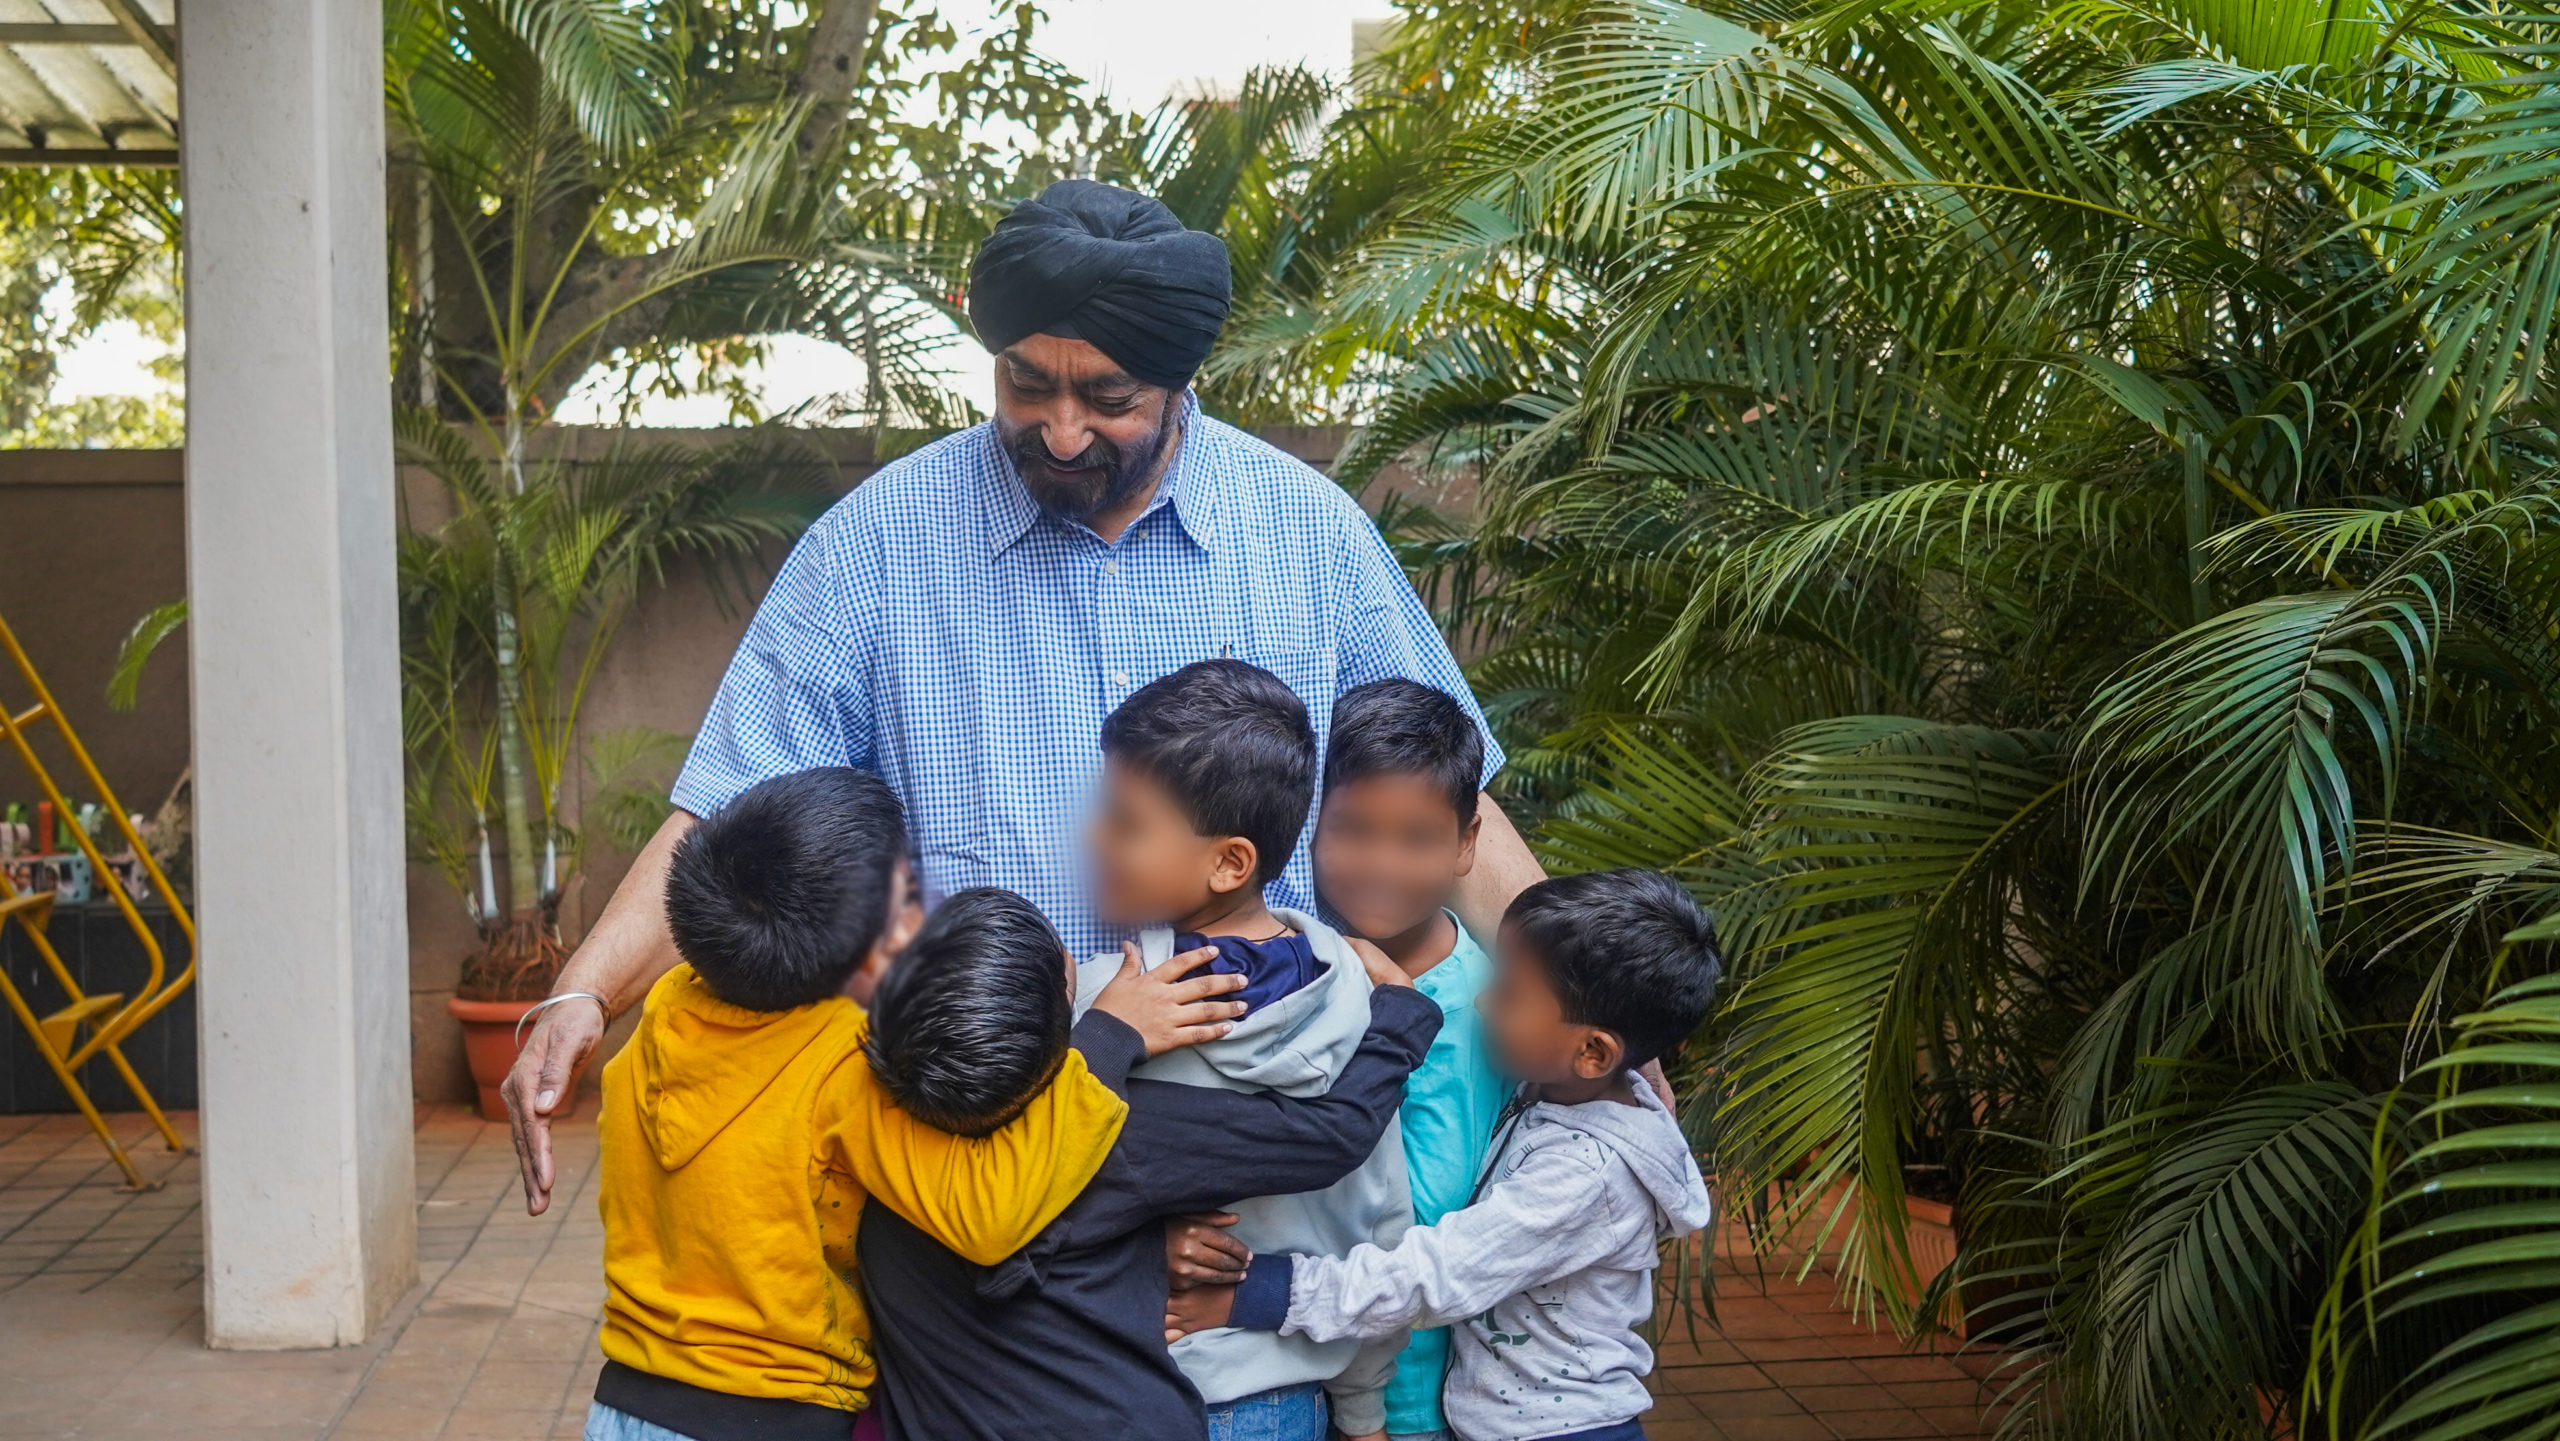 a man embracing a group of children outdoors